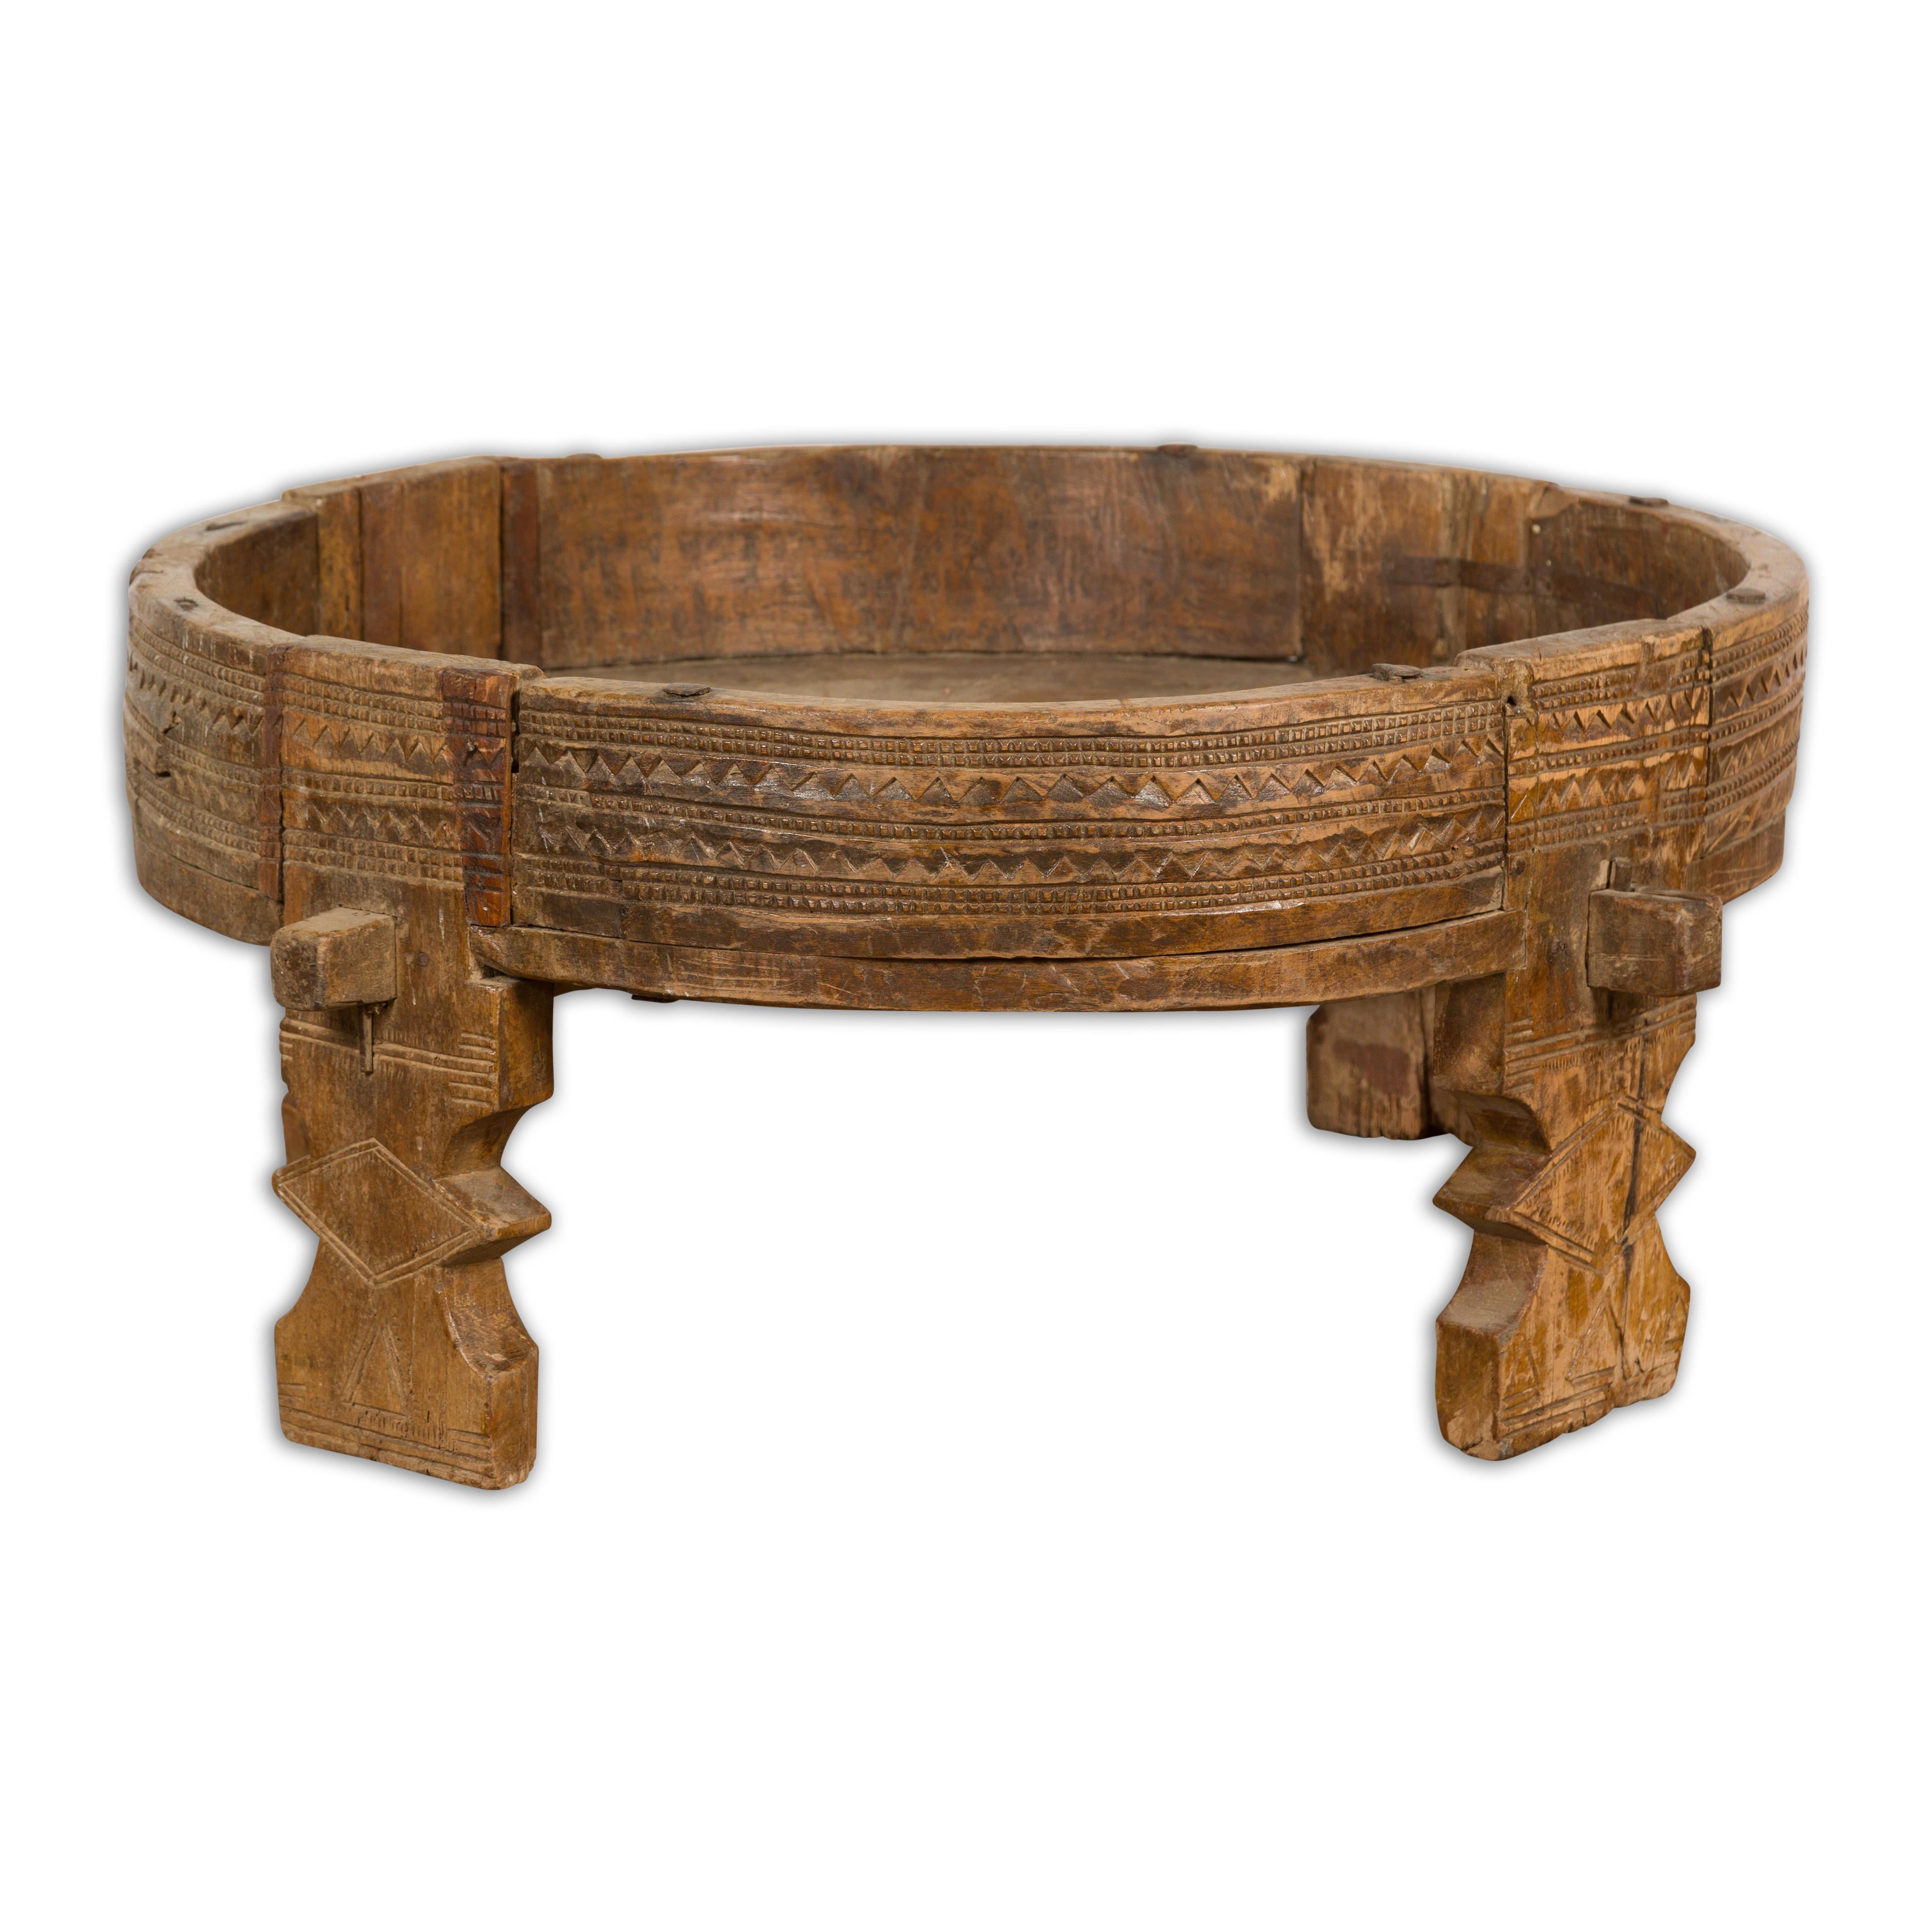 Tribal Indian 1920s Teak Chakki Grinding Table with Geometric Carved Motifs For Sale 10